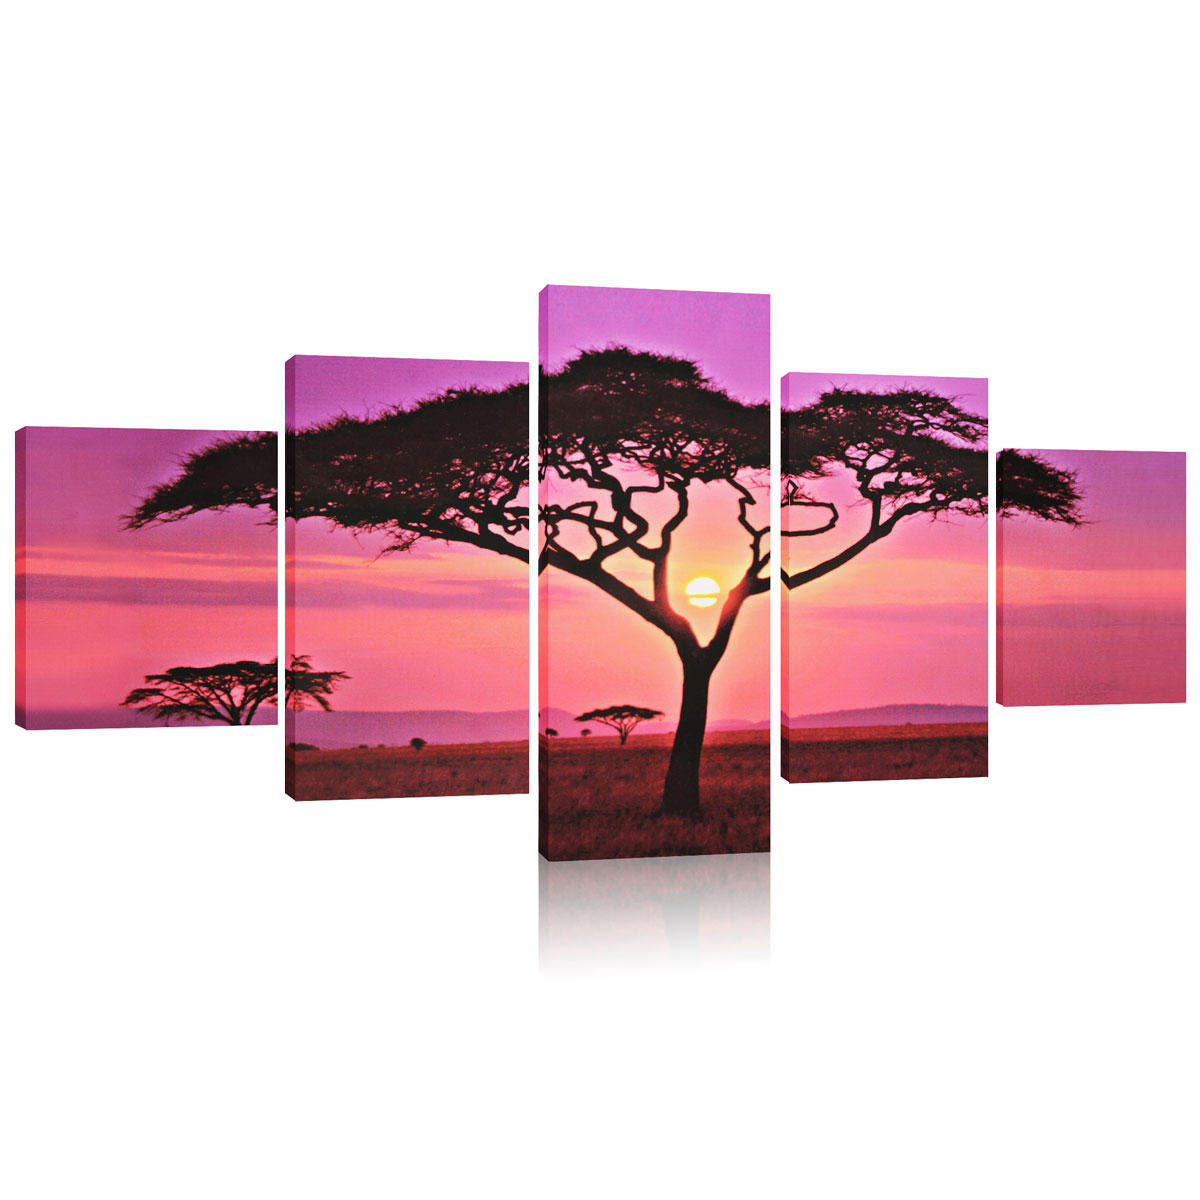 

Large Sunset&Tree Canvas Print Wall Art Painting Picture NO Frame Home Decorations